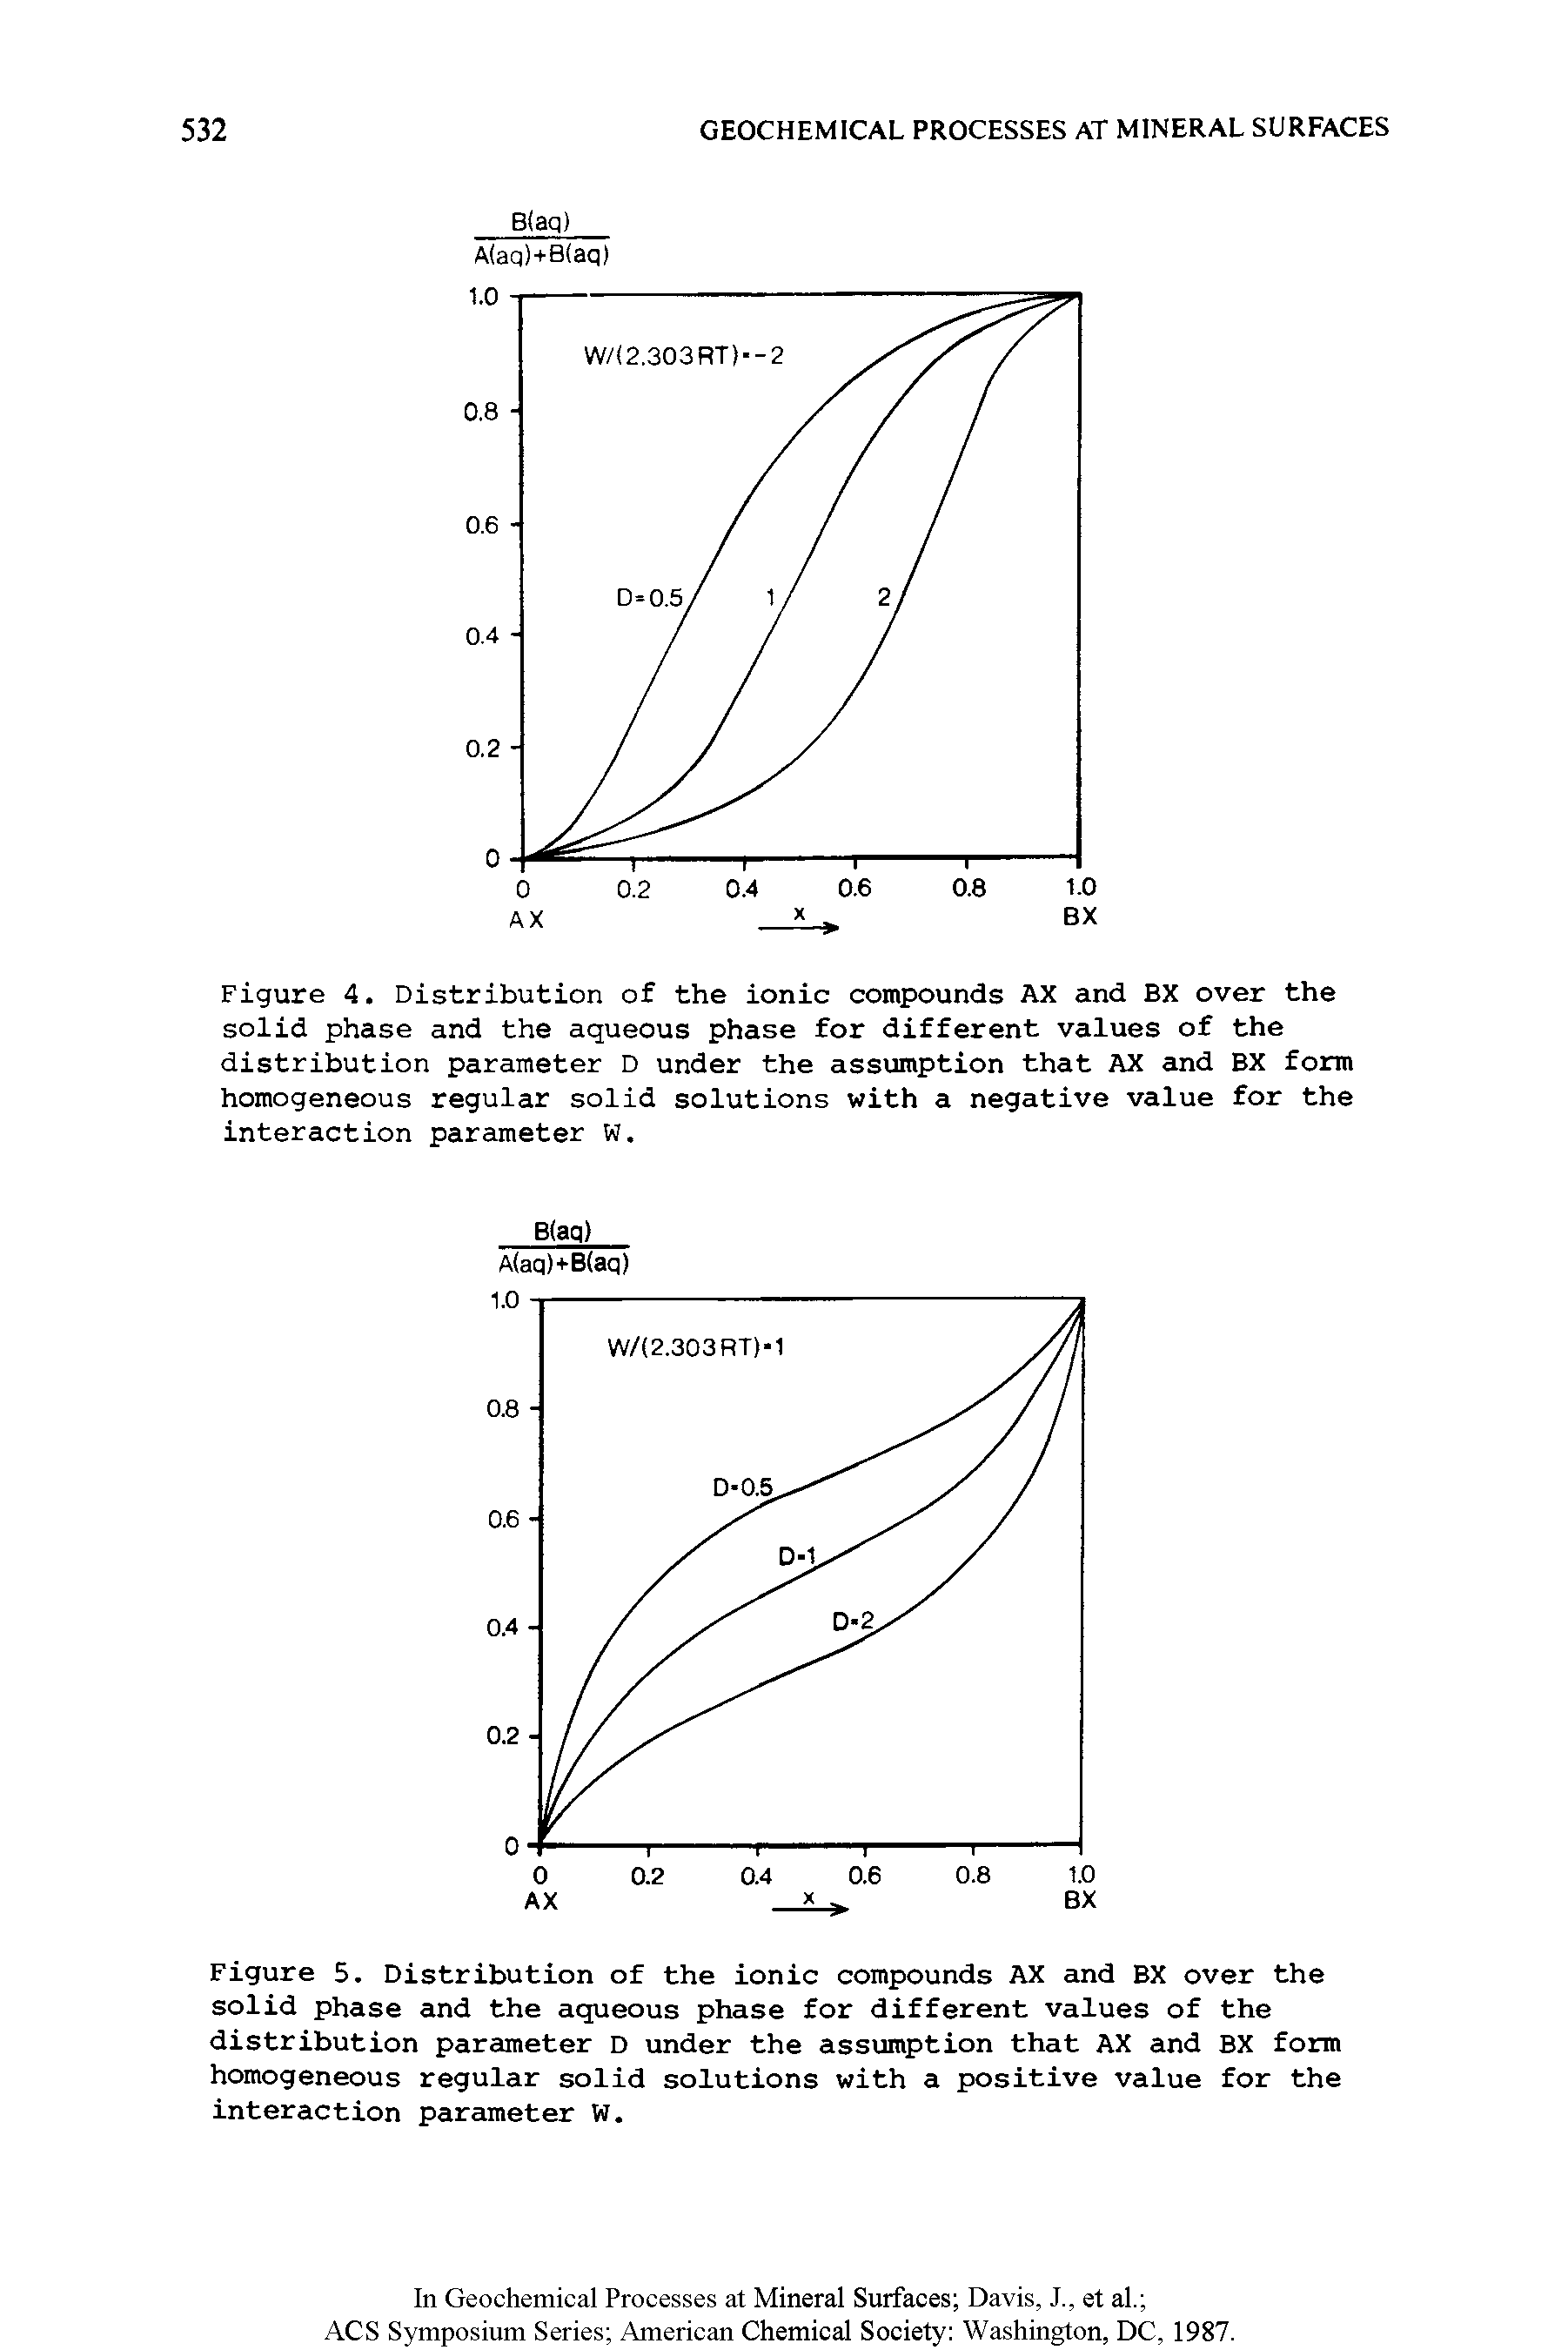 Figure 4. Distribution of the ionic compounds AX and BX over the solid phase and the aqueous phase for different values of the distribution parameter D under the assumption that AX and BX form homogeneous regular solid solutions with a negative value for the interaction parameter W.